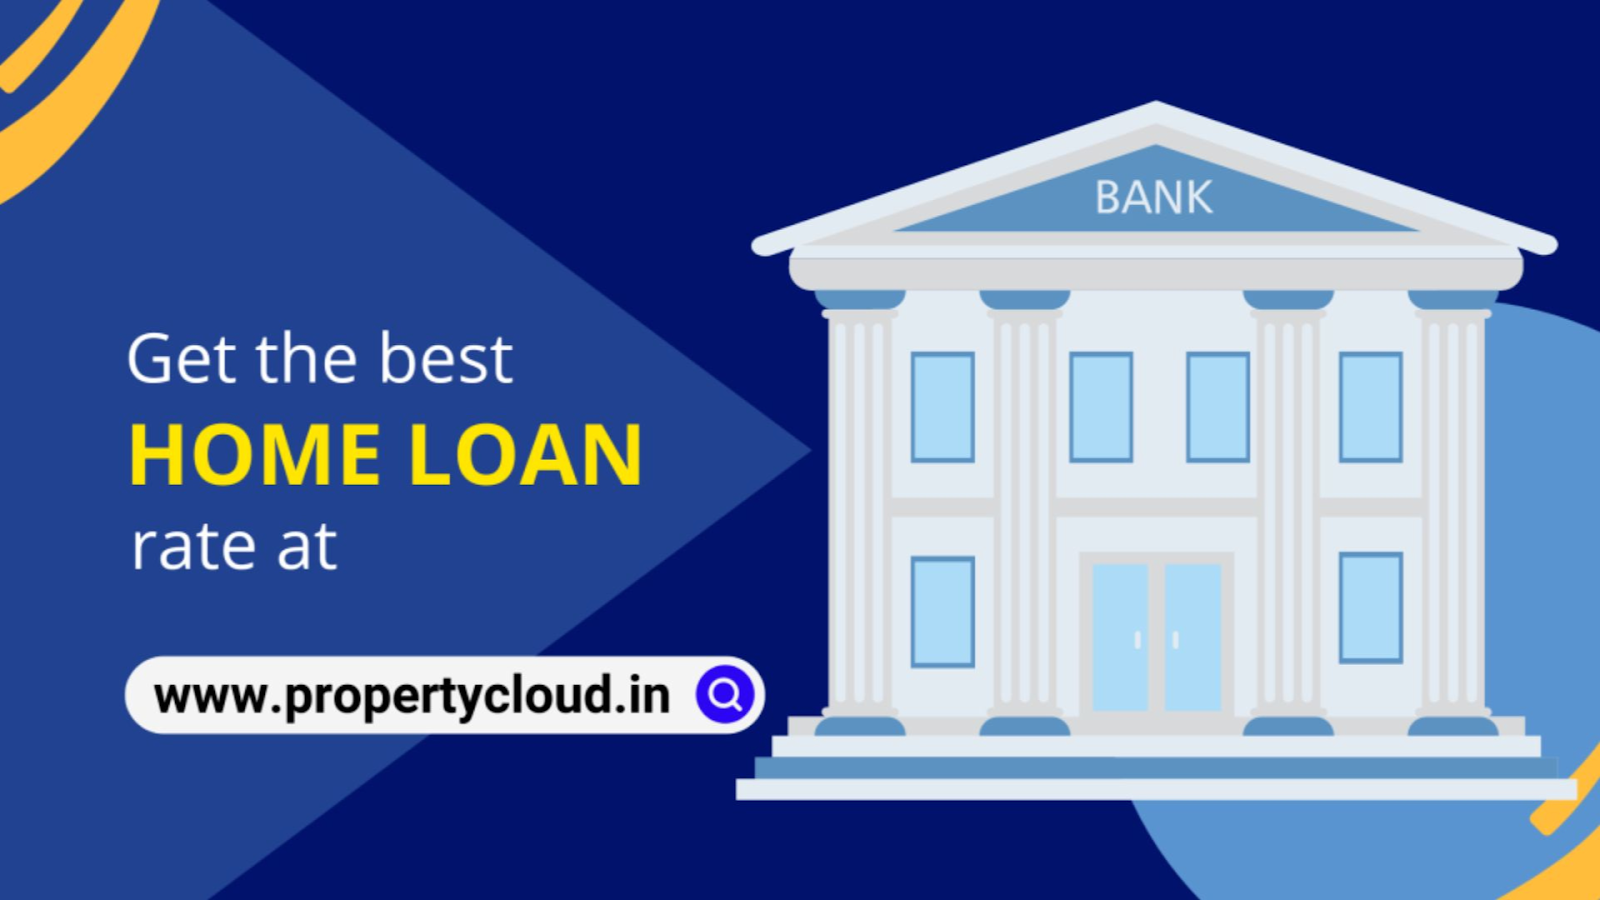 Contact PropertyCloud and get a home loan at the best interest rate.